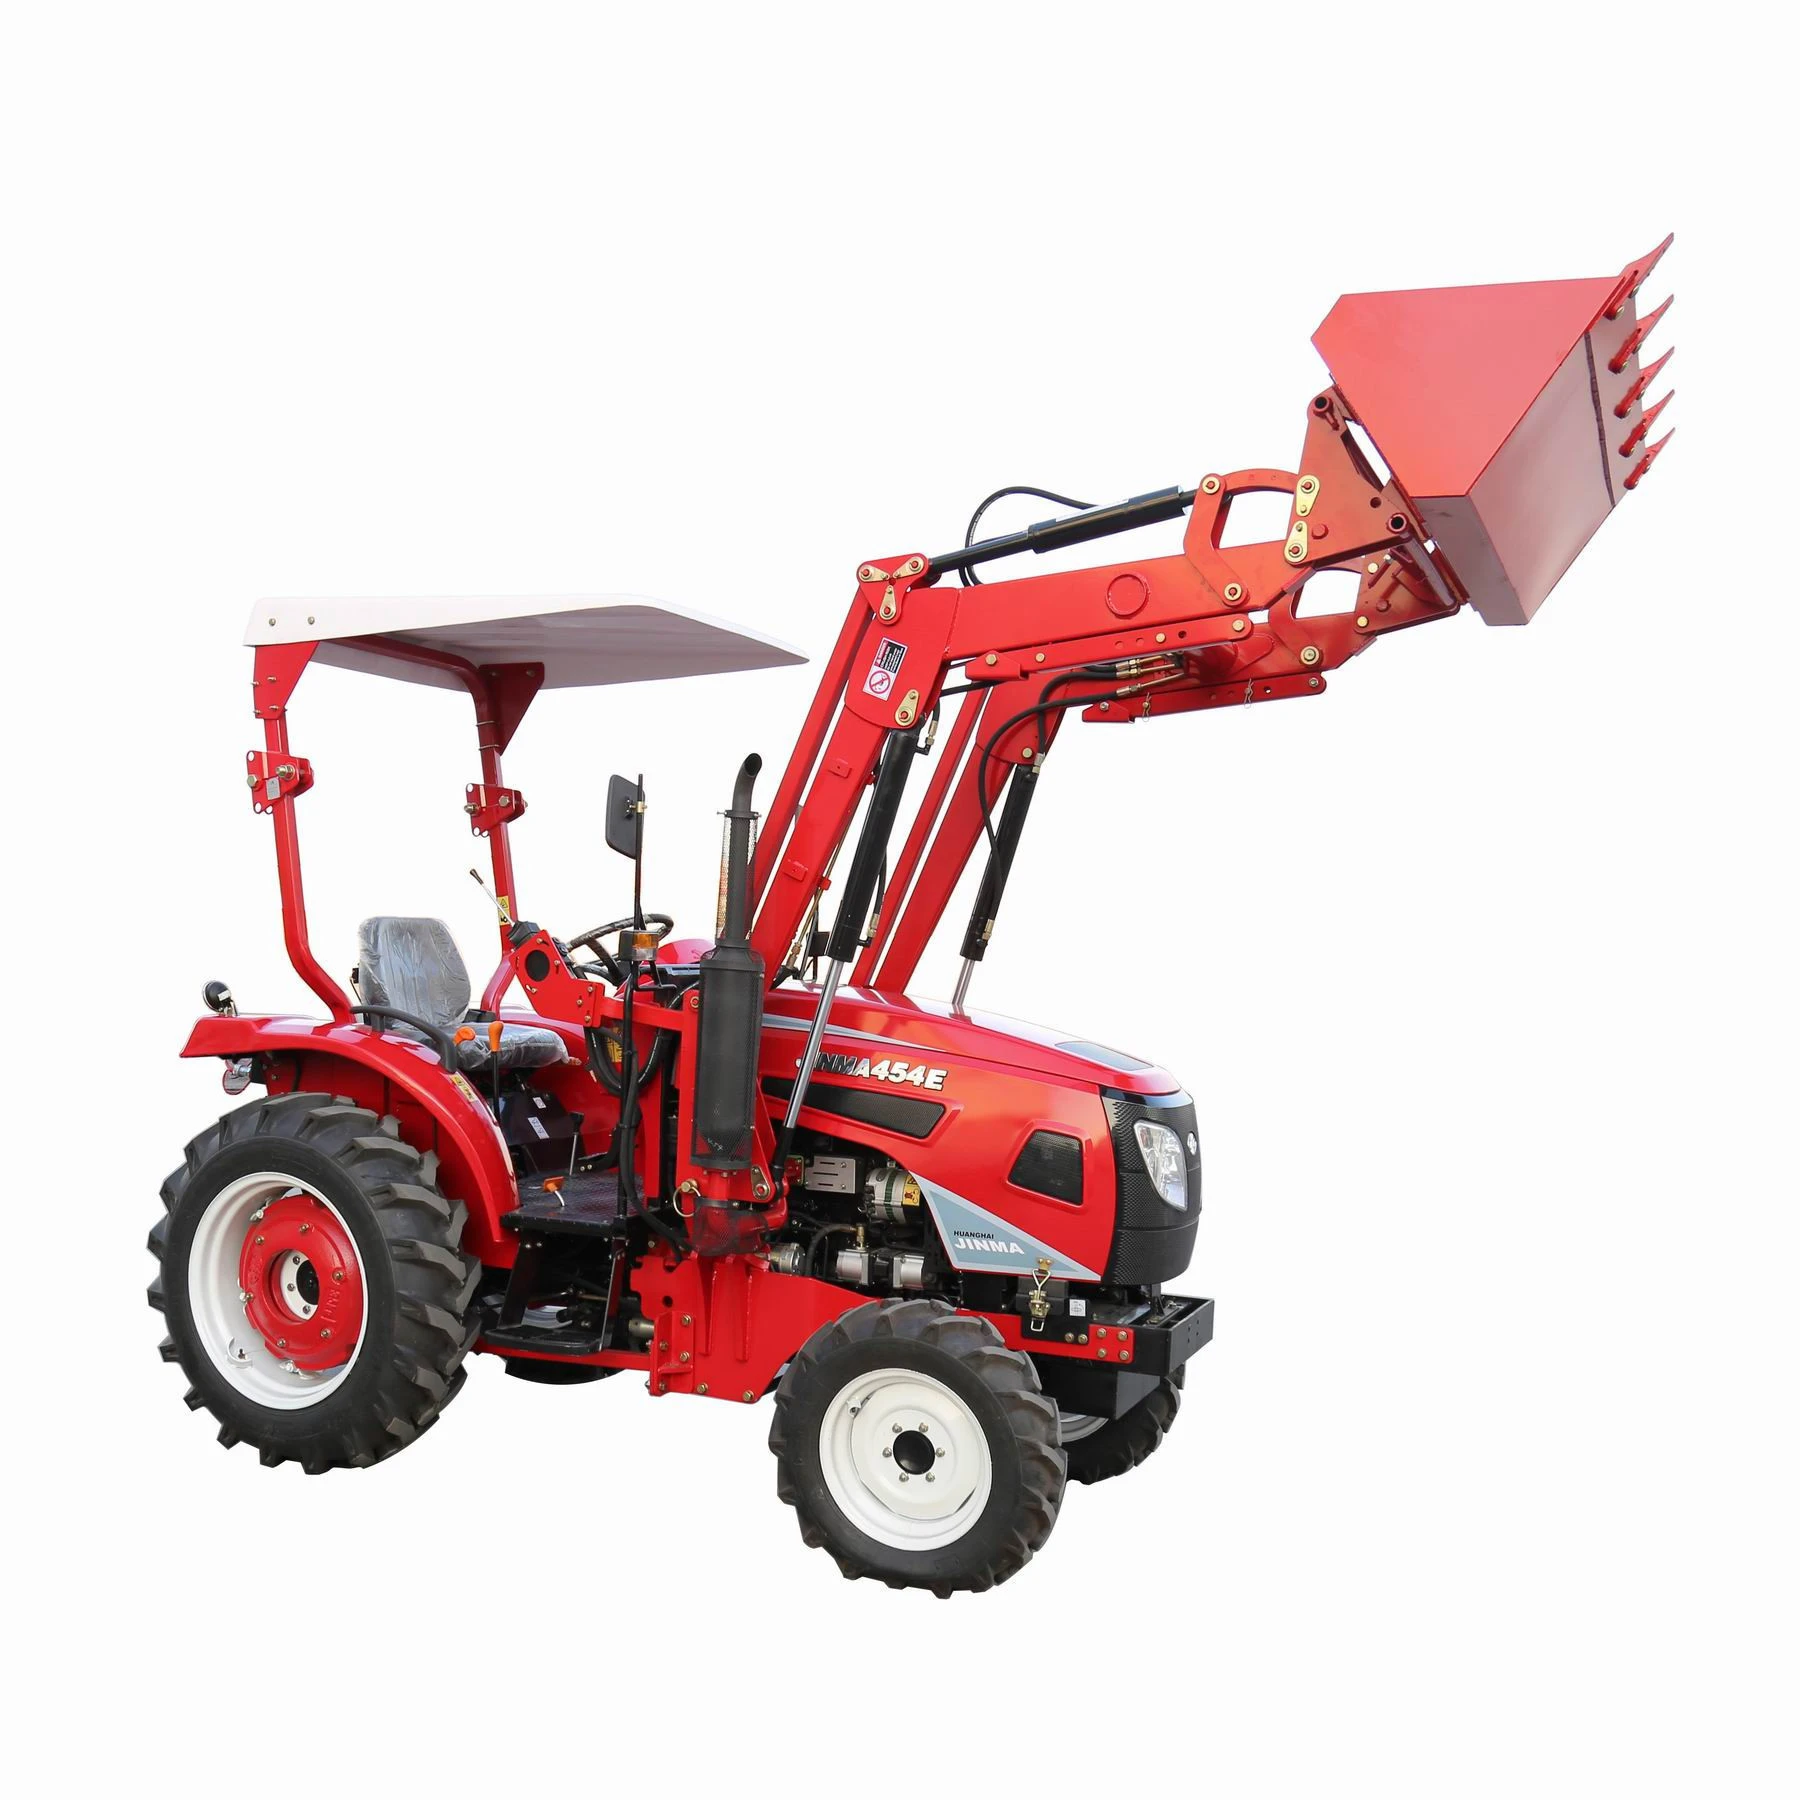 China agricultural machinery jinma 254 454 4x4 mini front end loader farm tractors with EEC for sale in Europe